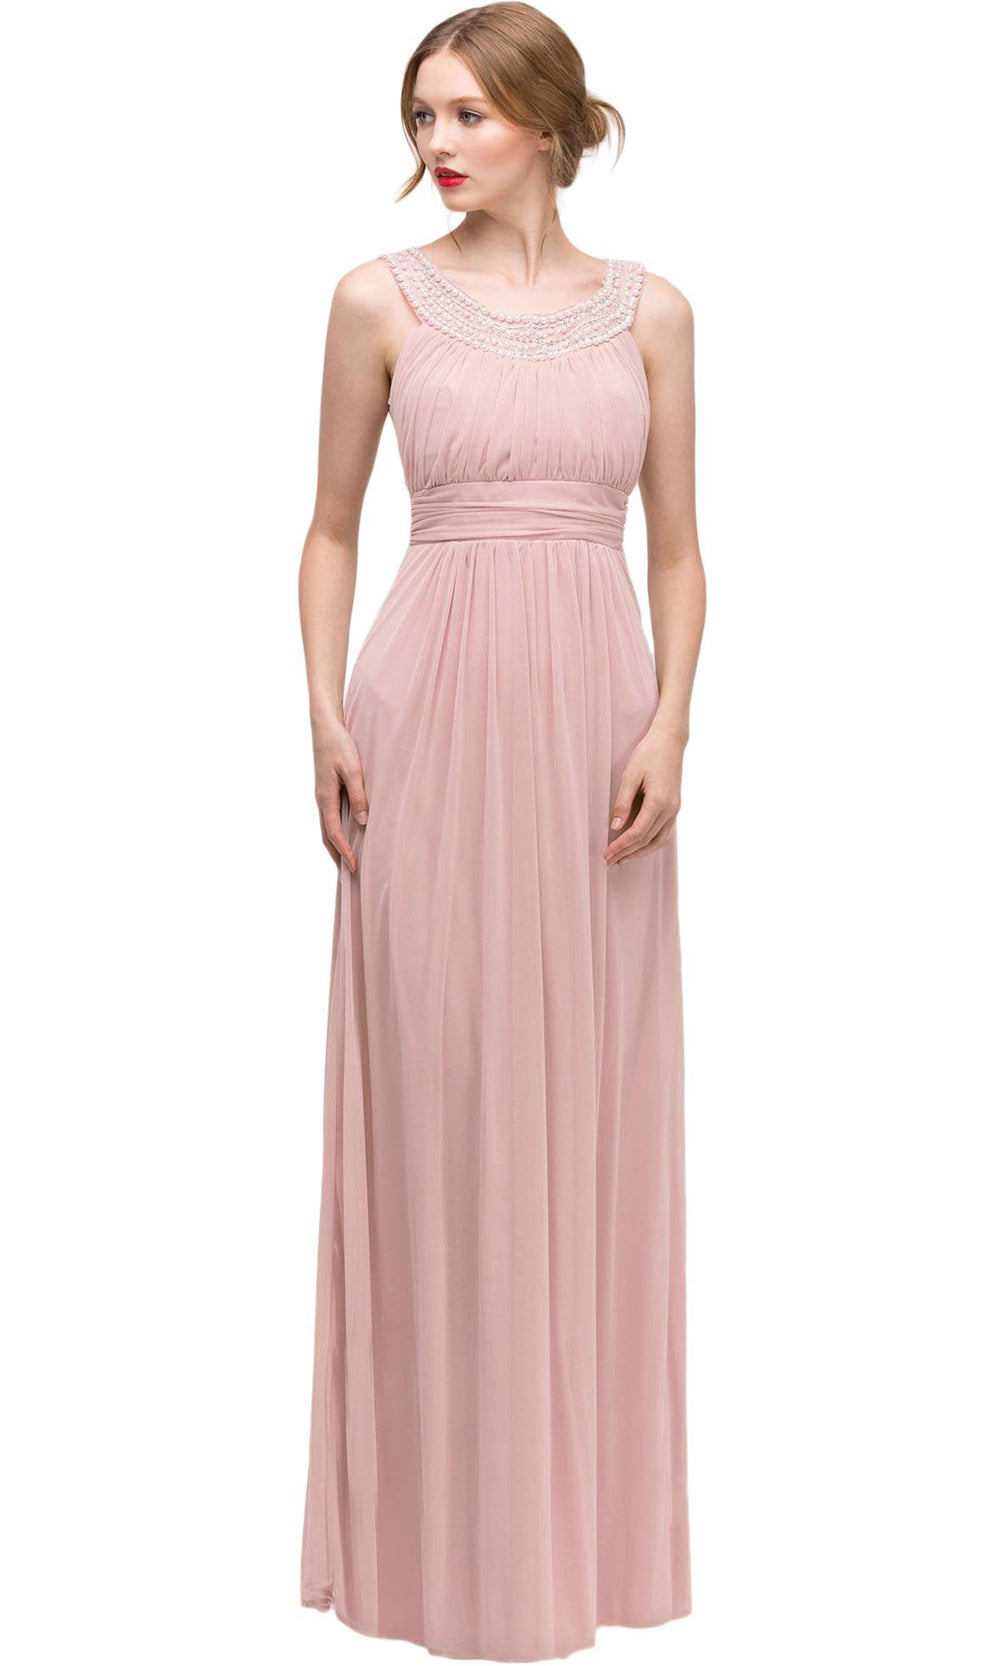 Eureka Fashion - 2027SC Ruched Simple and Flowy Scoop Dress In Pink